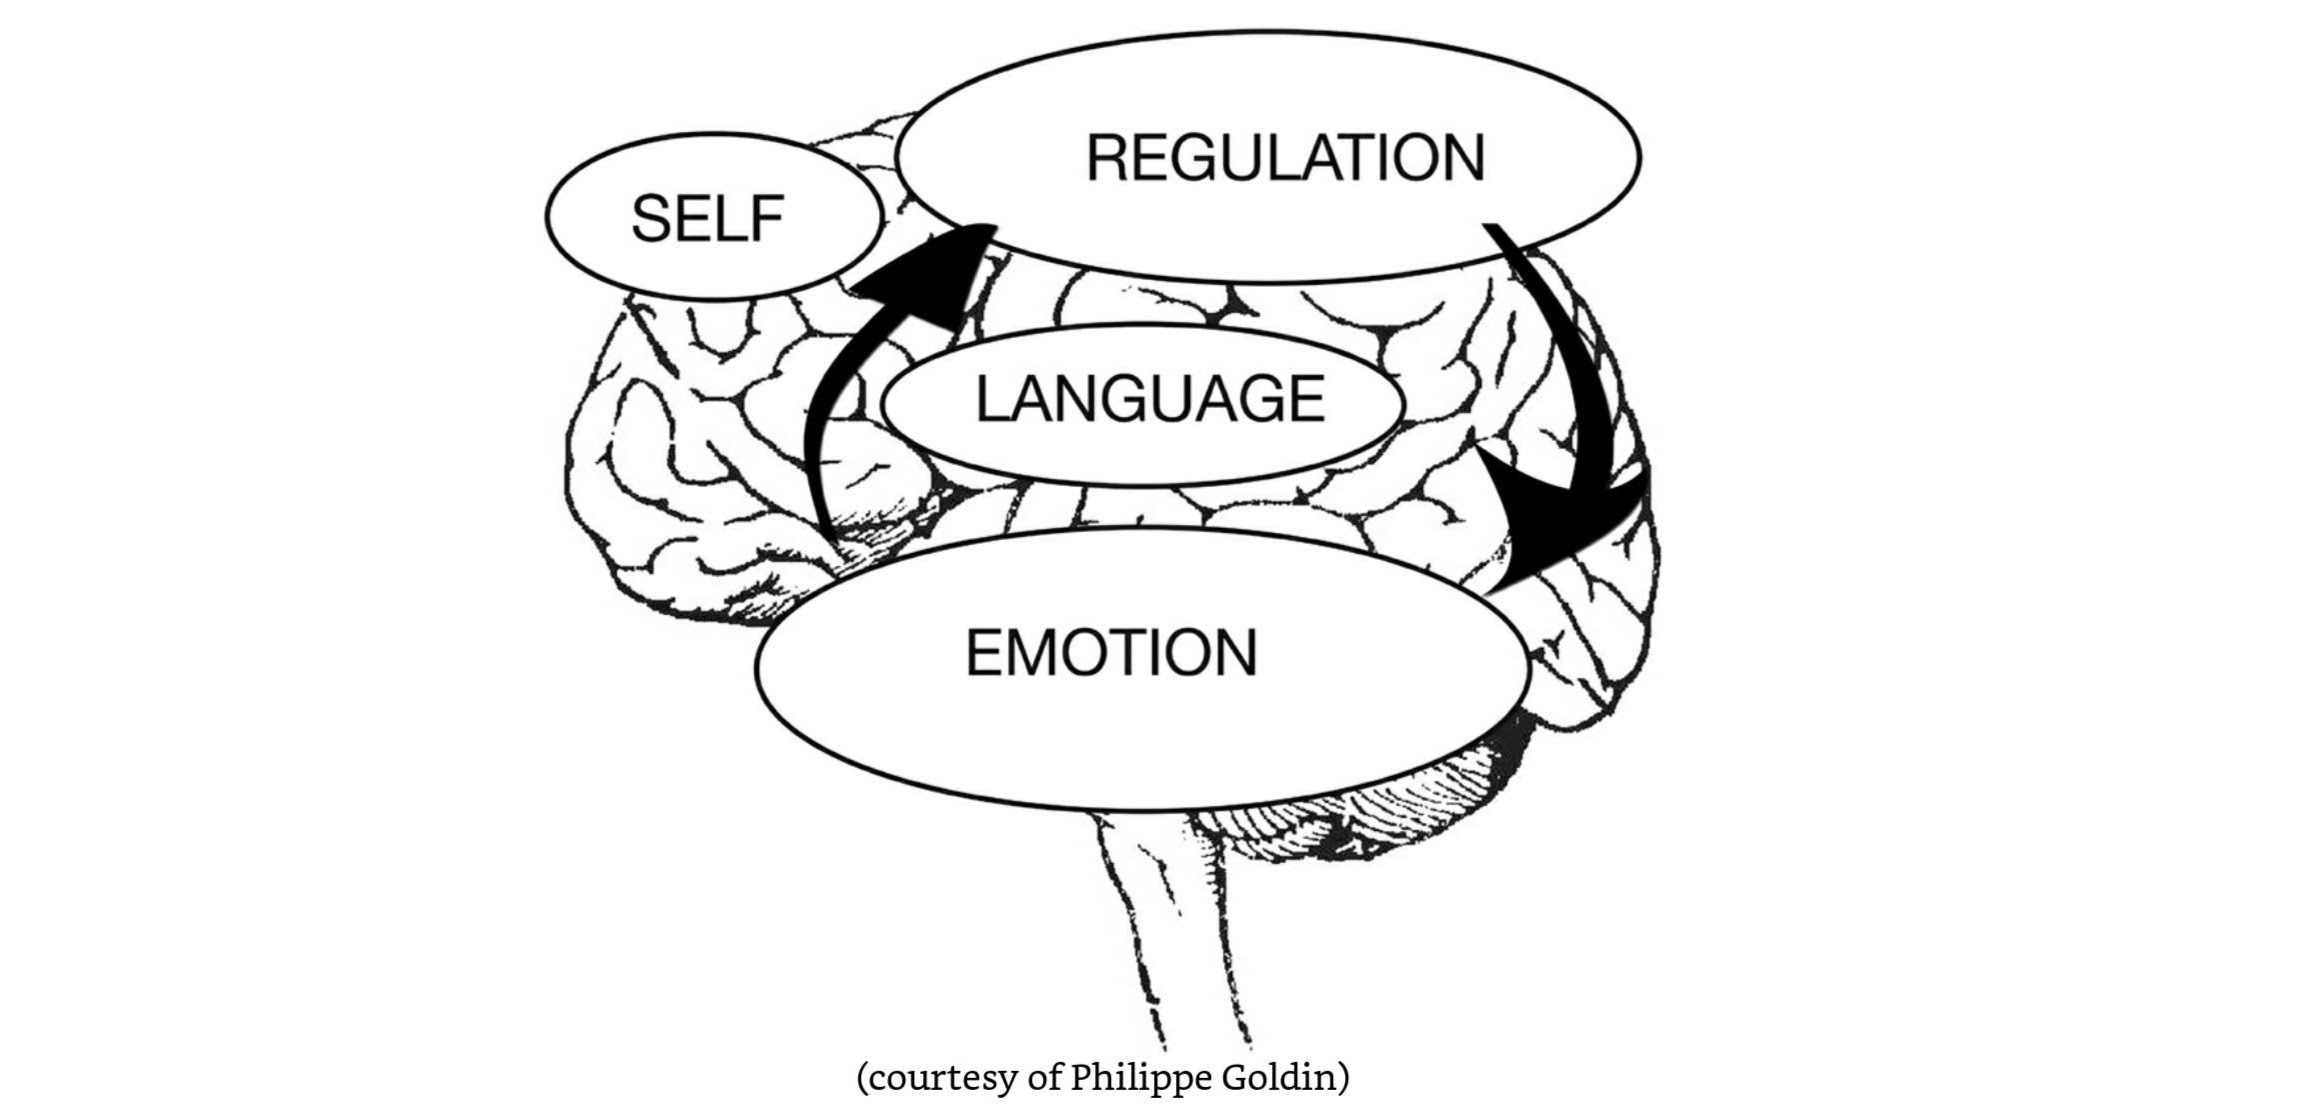 Philippe Goldin's model of the parts of the brain: Emotion, Language, Regulation and Self